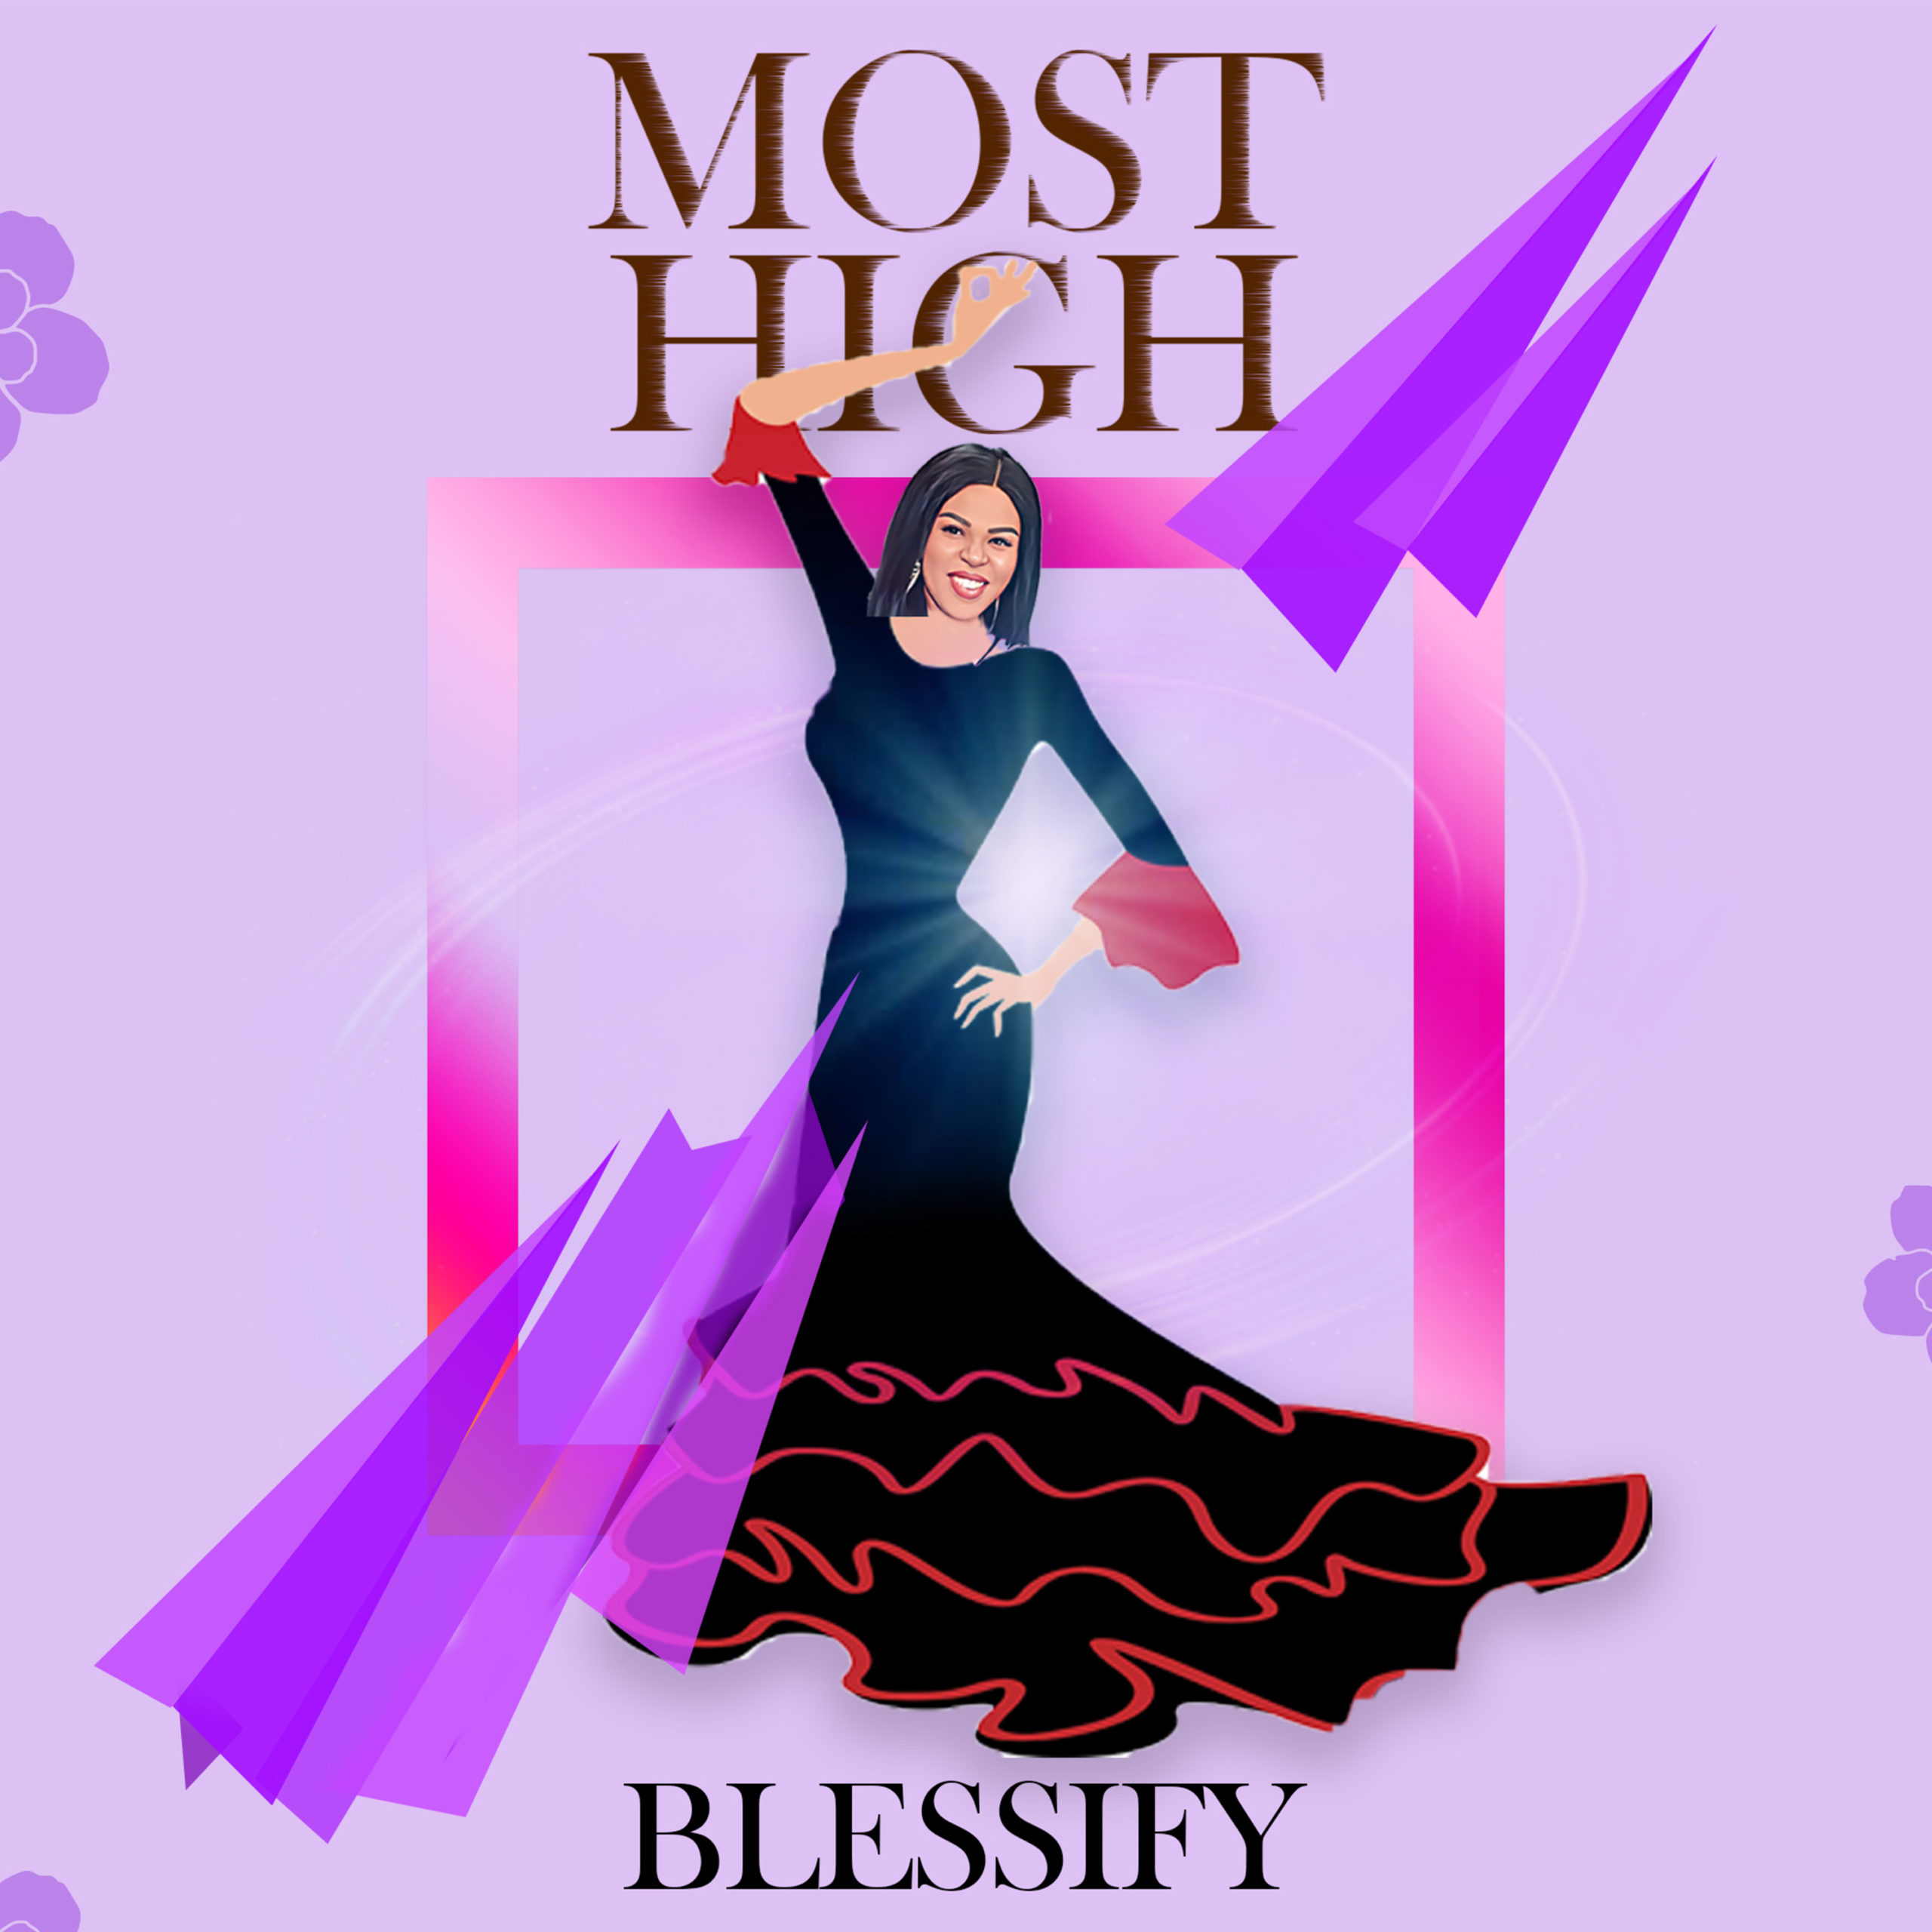 Most High Blessify - Latest Gospel Songs